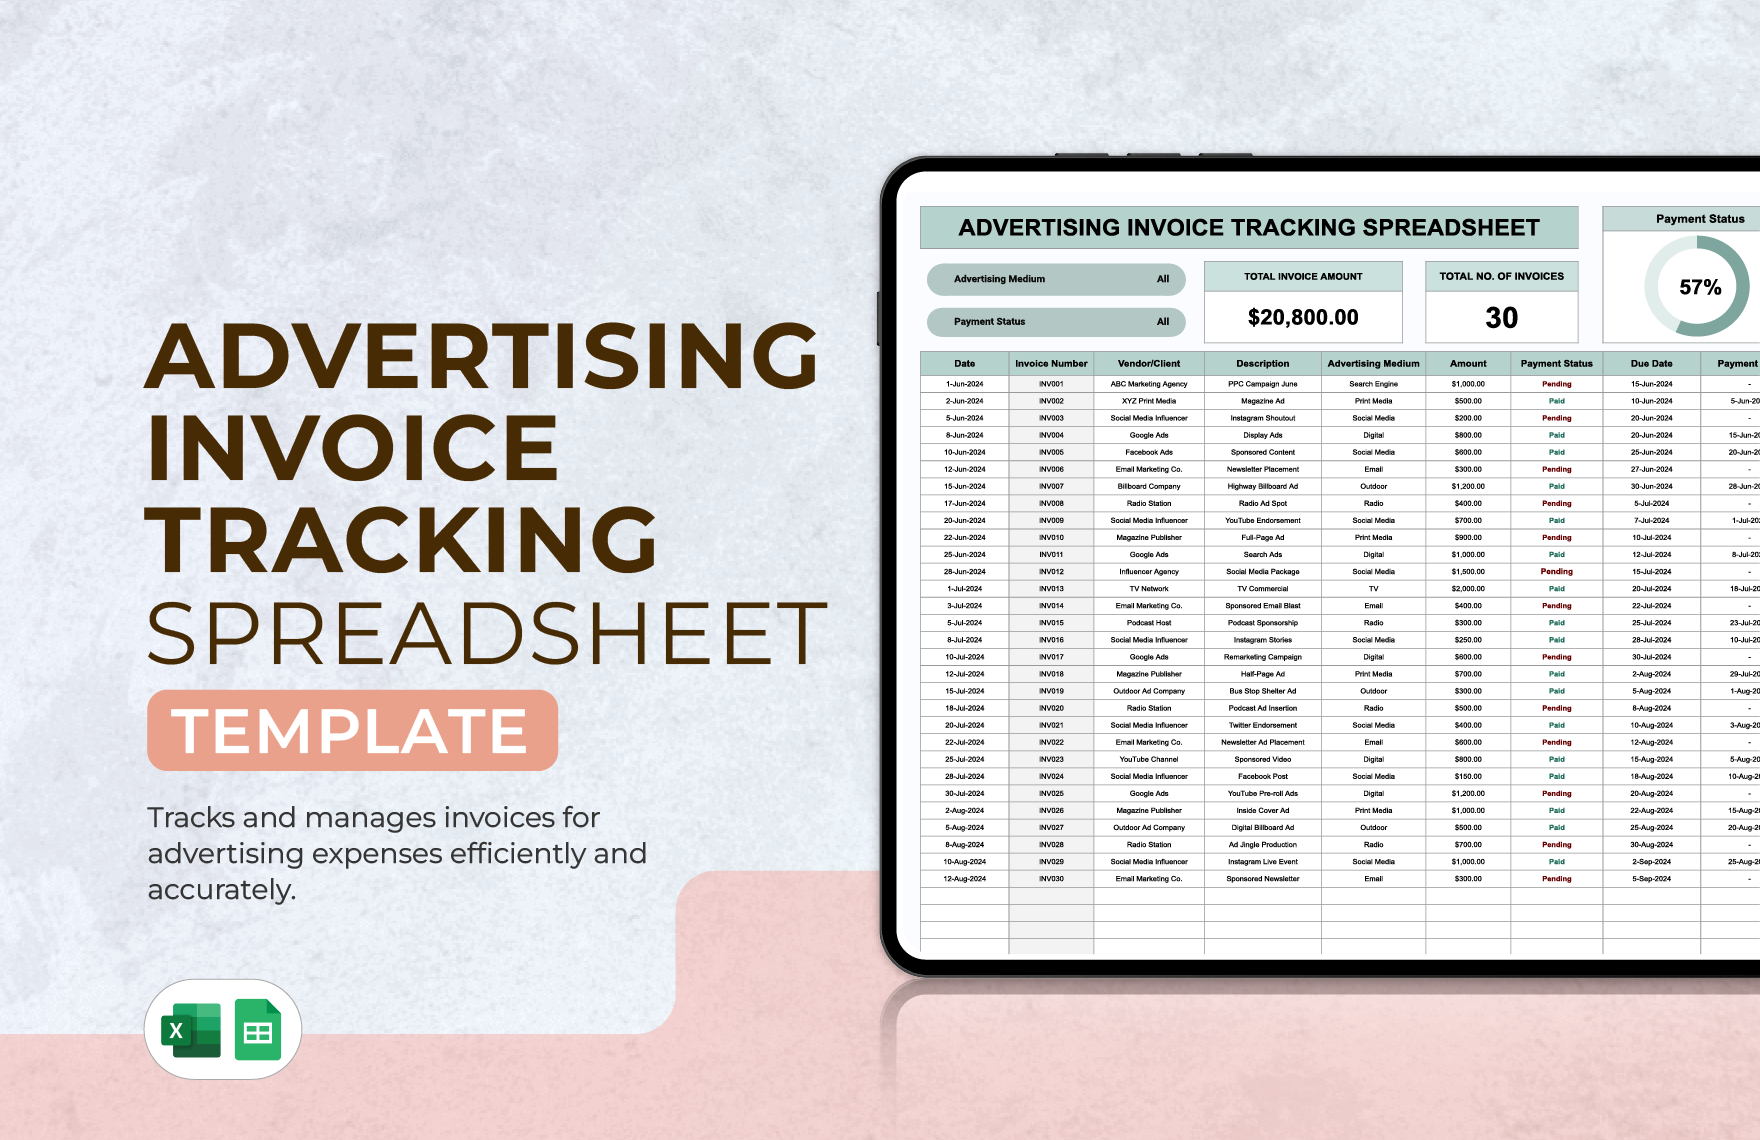 Advertising Invoice Tracking Spreadsheet Template in Excel, Google Sheets